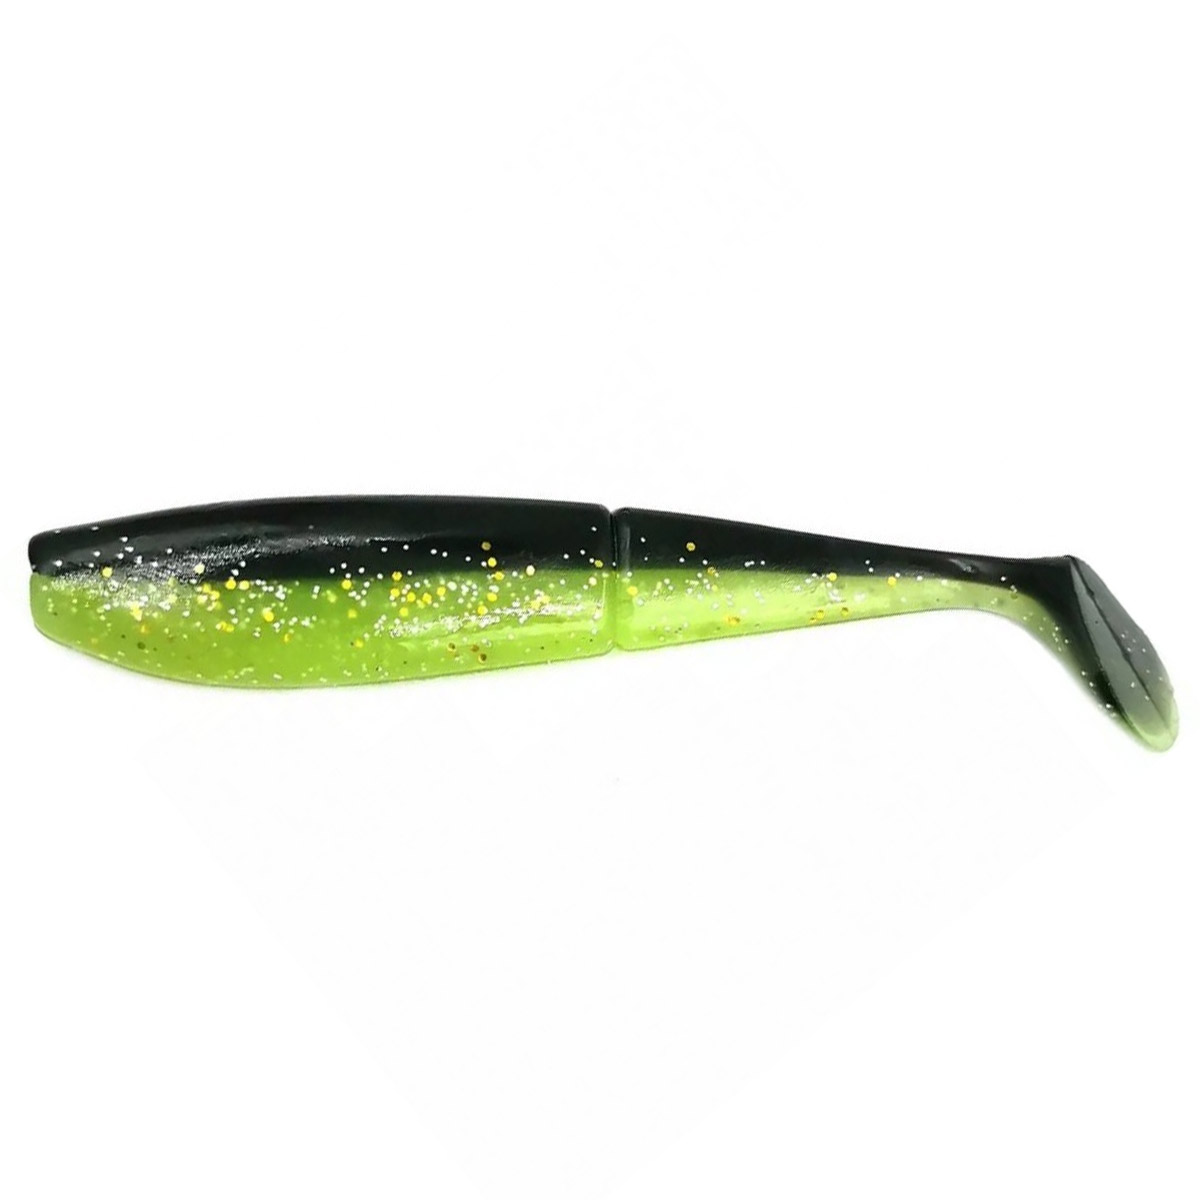 Soft Lure Lucky John ROACH PADDLE TAIL - 9cm ✴️️️ Shads ✓ TOP